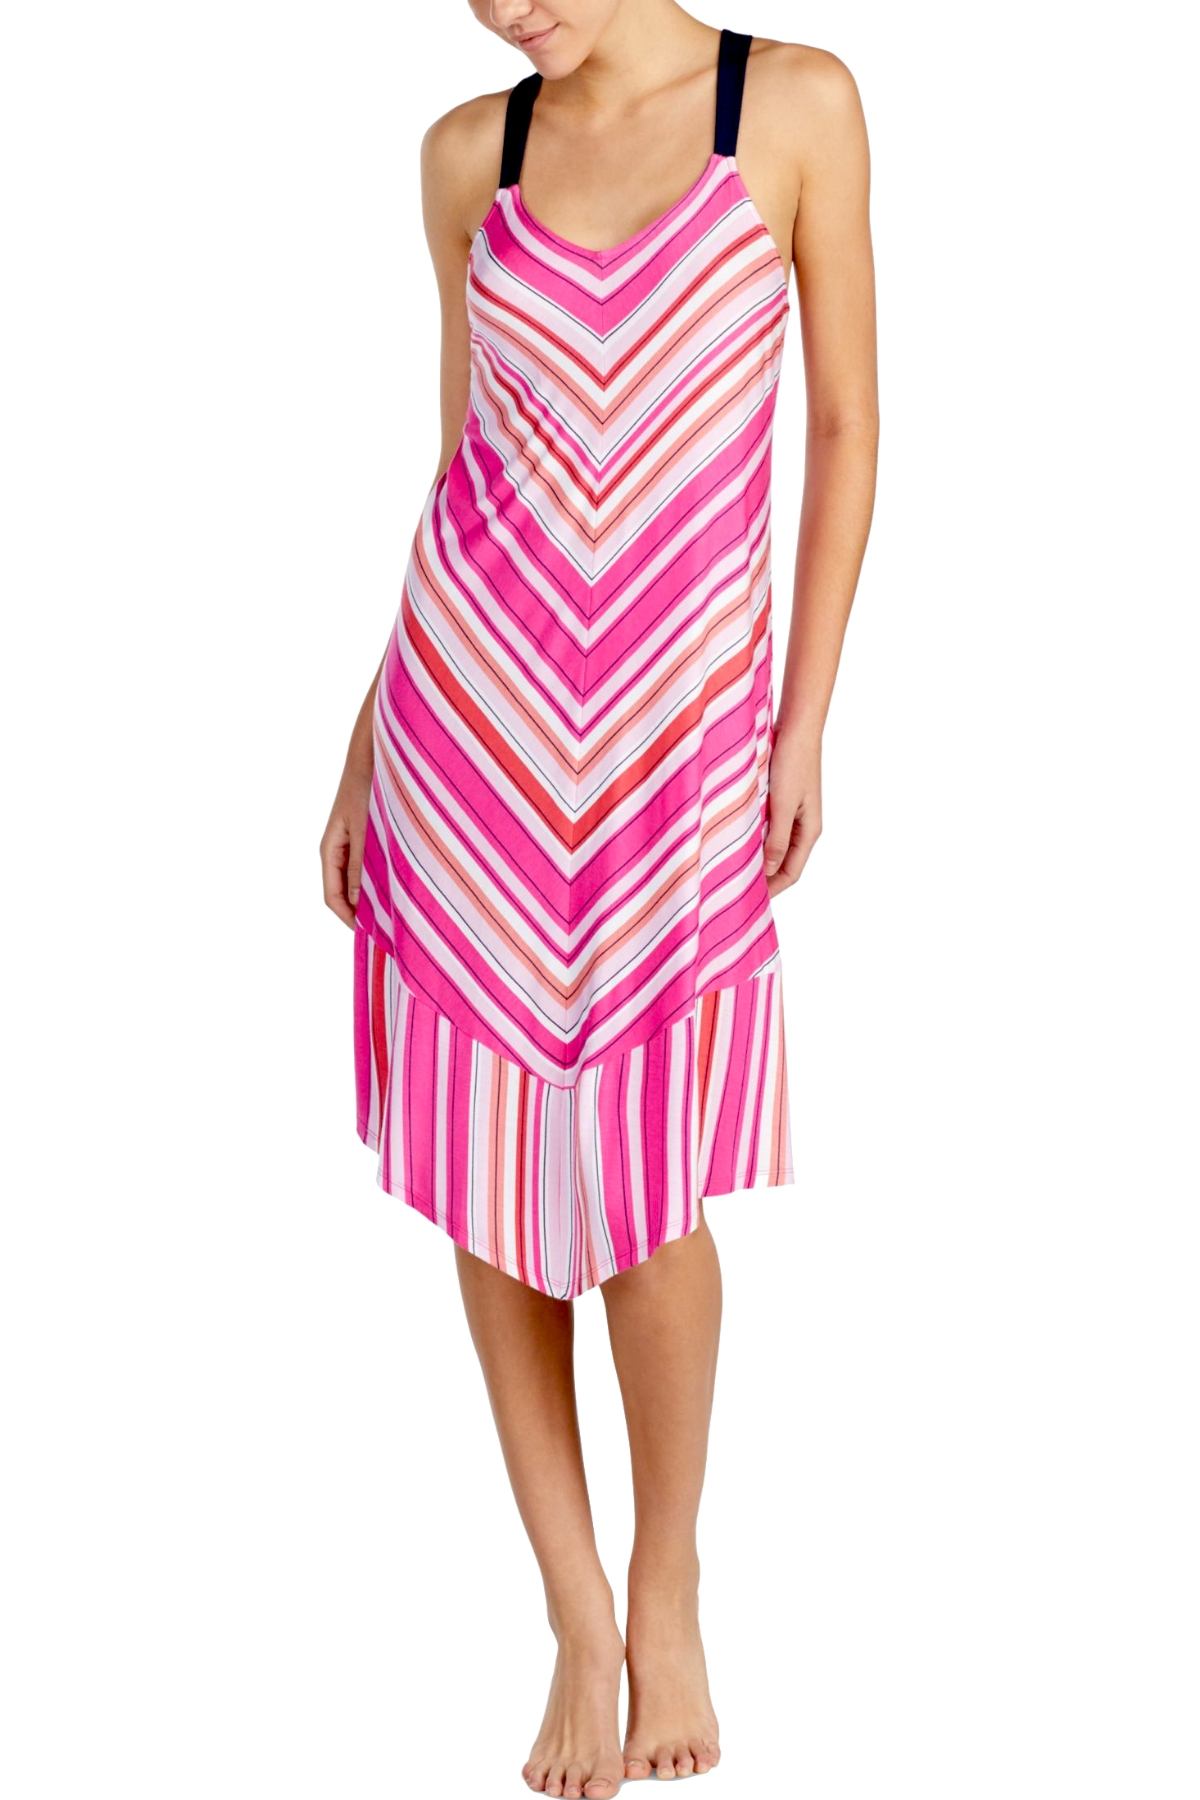 Layla Pink V-Striped Nightgown